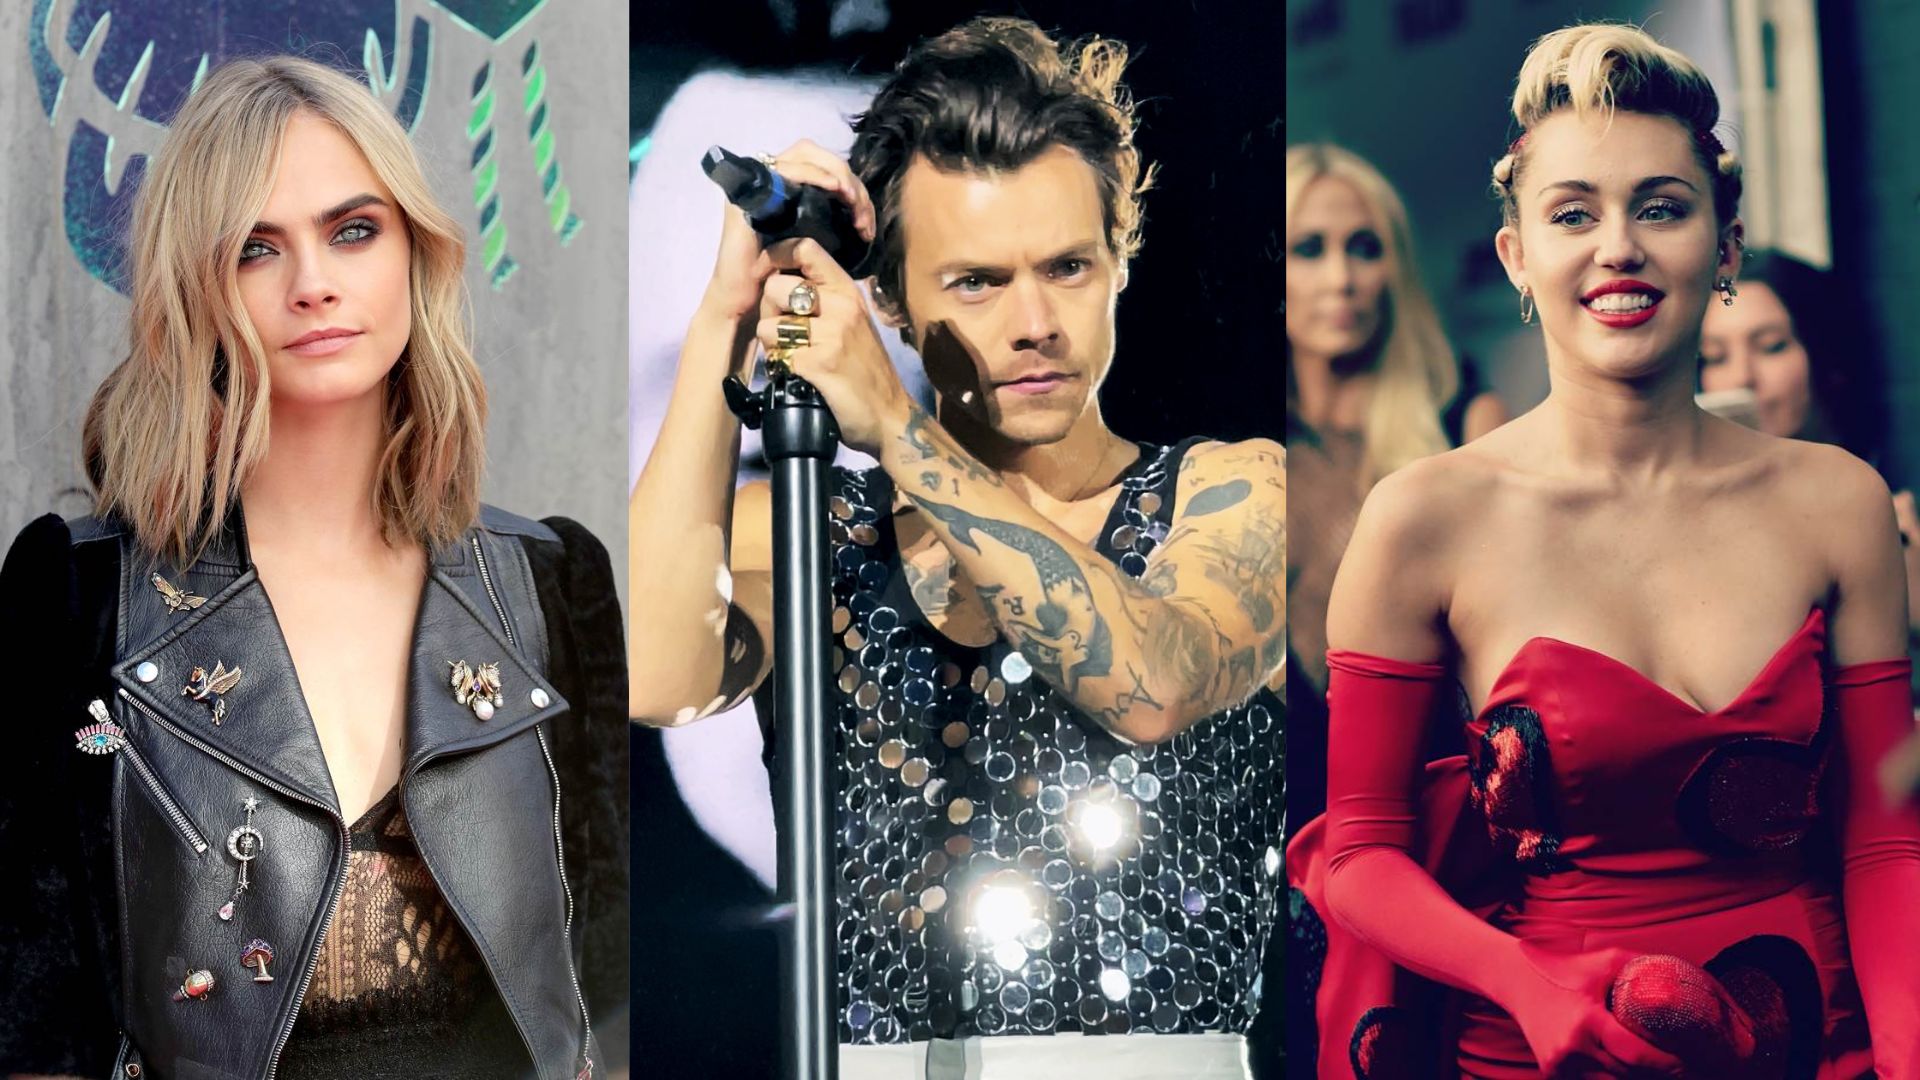 Harry-styles-talks-about-labels-sexuality-gender-issues-miley-cyrus-cara-delevingne-raven-symone